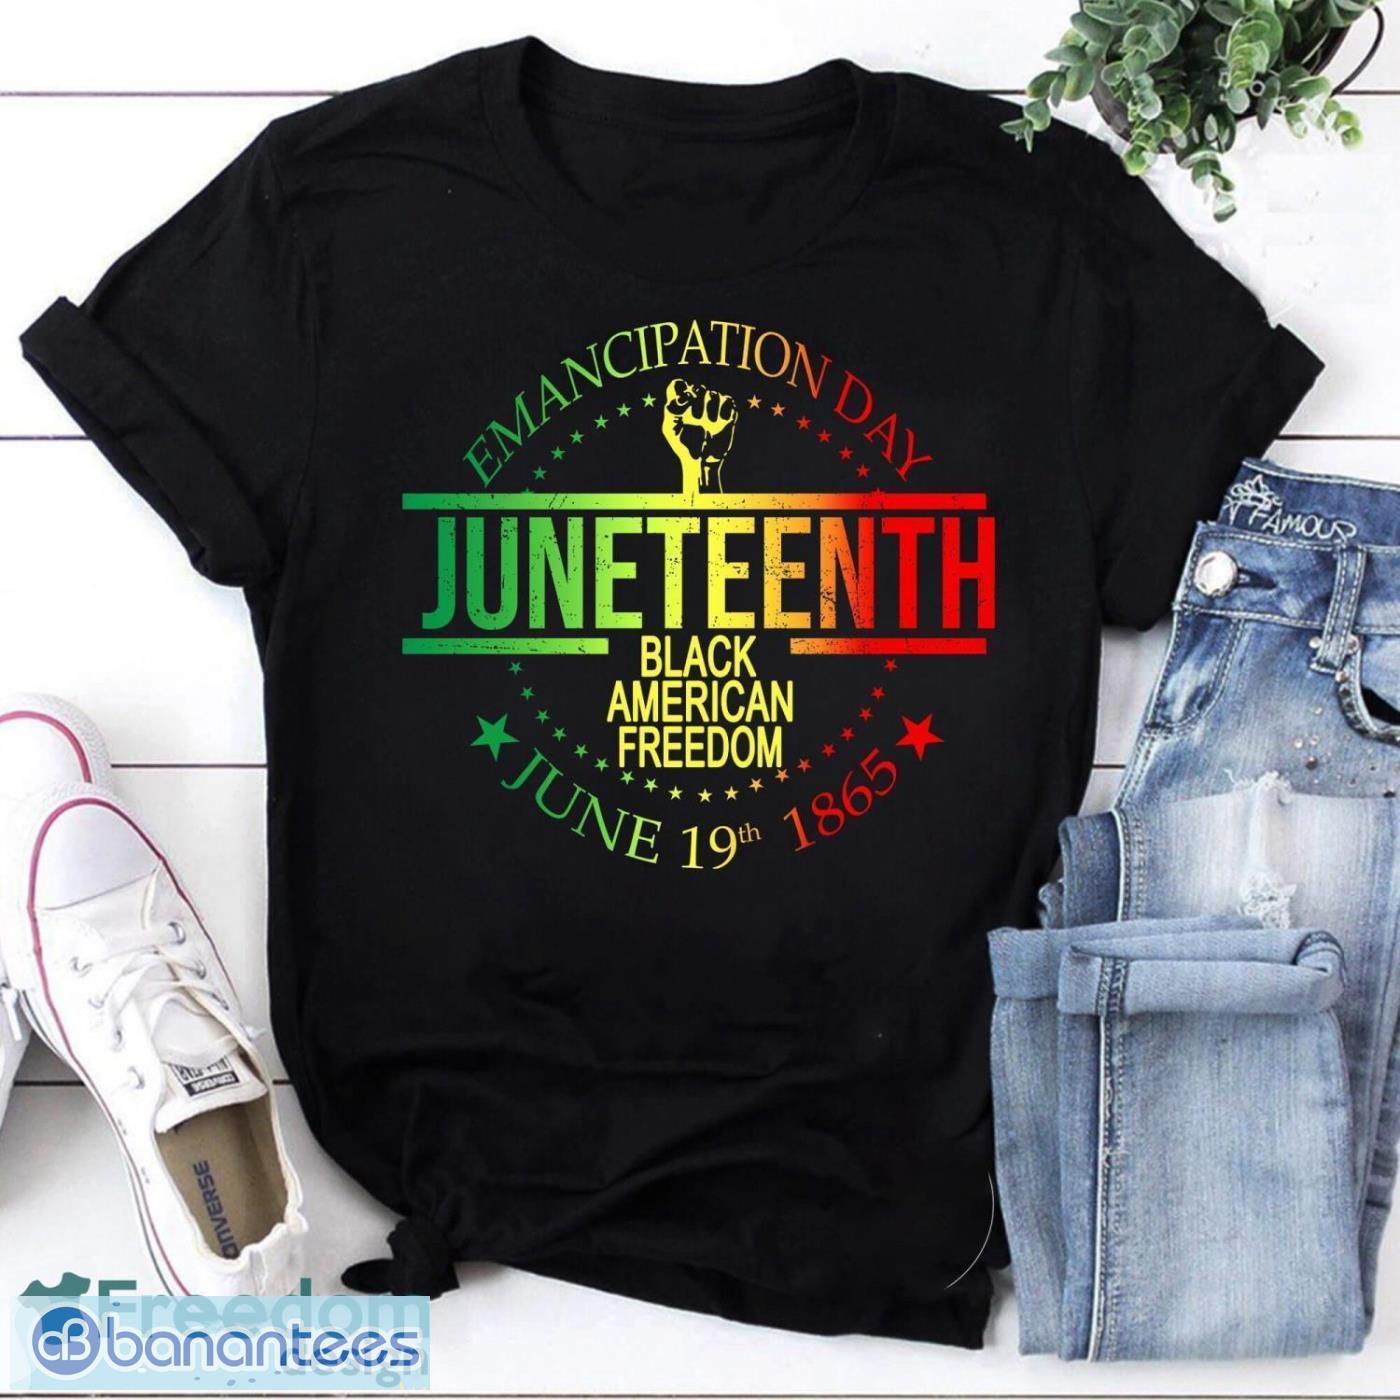 Emancipation Day Juneteenth Black American Freedom June 19th 1865 Vintage T-Shirt Product Photo 1